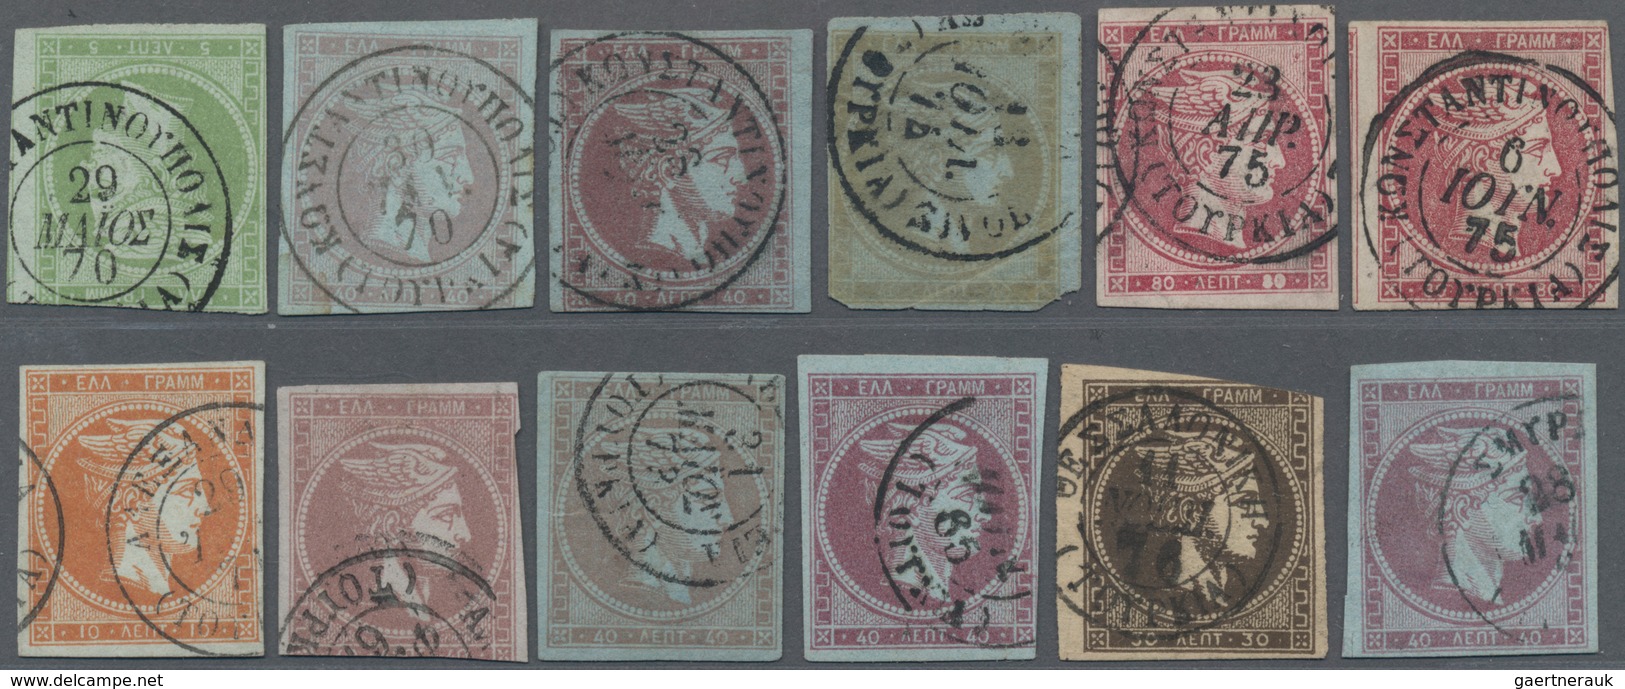 Griechenland - Stempel: 1865/1877, Greek Post Offices Abroad, Group With 12 Stamps, Comprising 'Herm - Postmarks - EMA (Printer Machine)